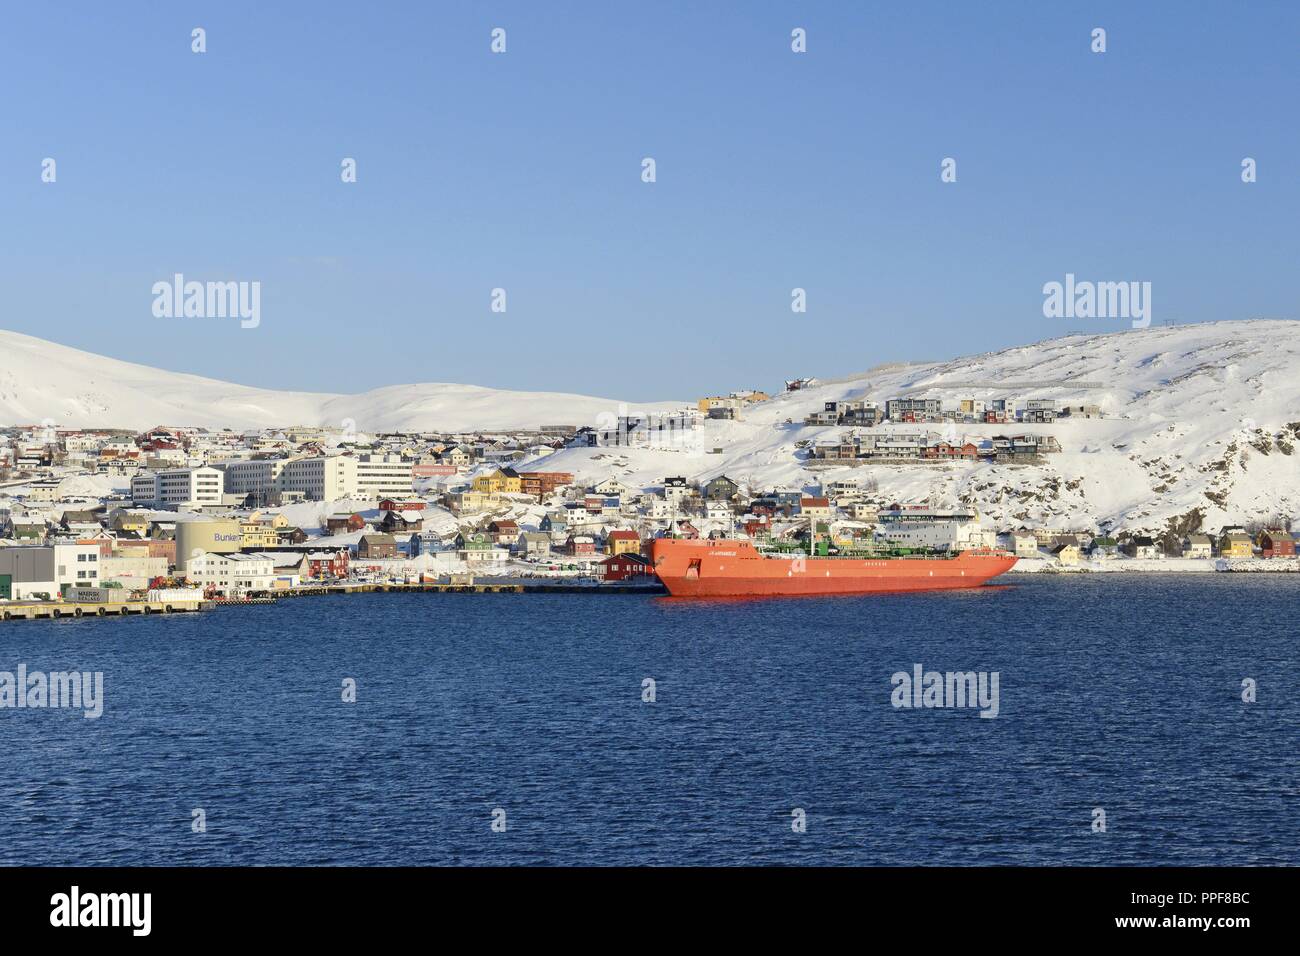 The bay of Hammerfest with a big red ship in front of the town's buildings on the snow white slopes from the island Kvaløy, 9 March 2017 | usage worldwide Stock Photo